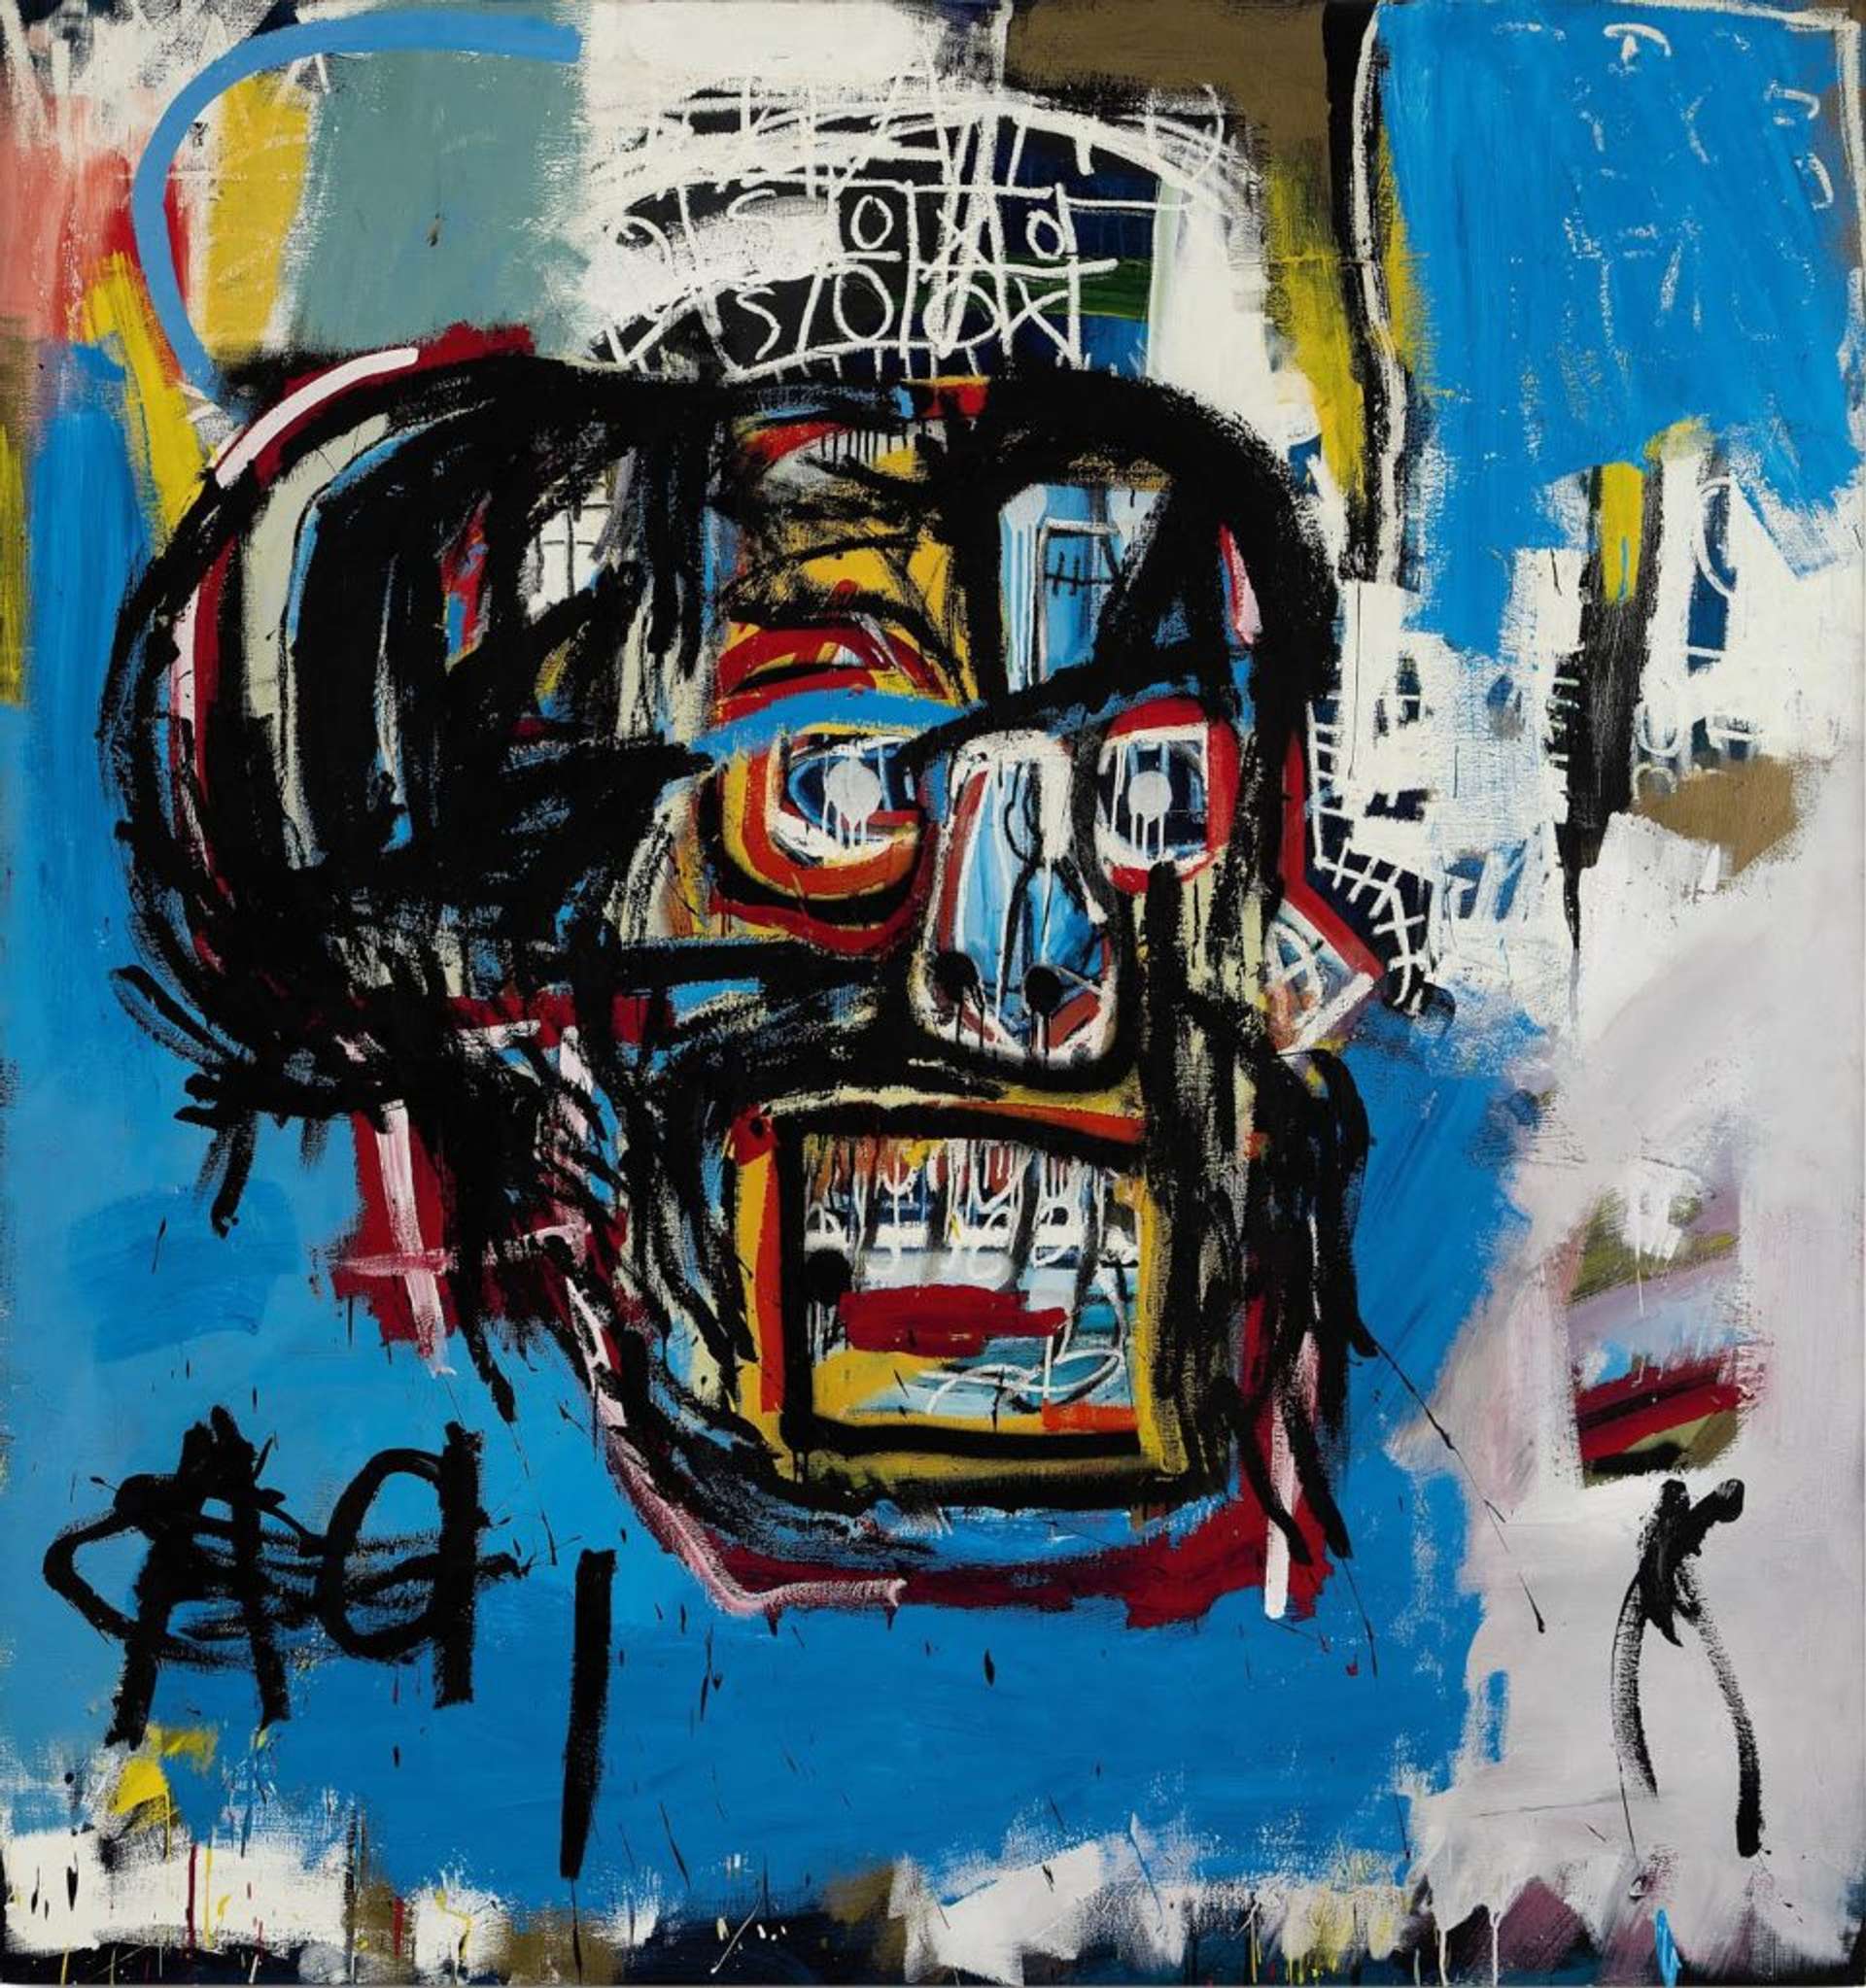 An image of Untitled (1982) by Jean-Michel Basquiat, which depicts a mask-like face, rendered in black, red and yellow, against a blue and white background.